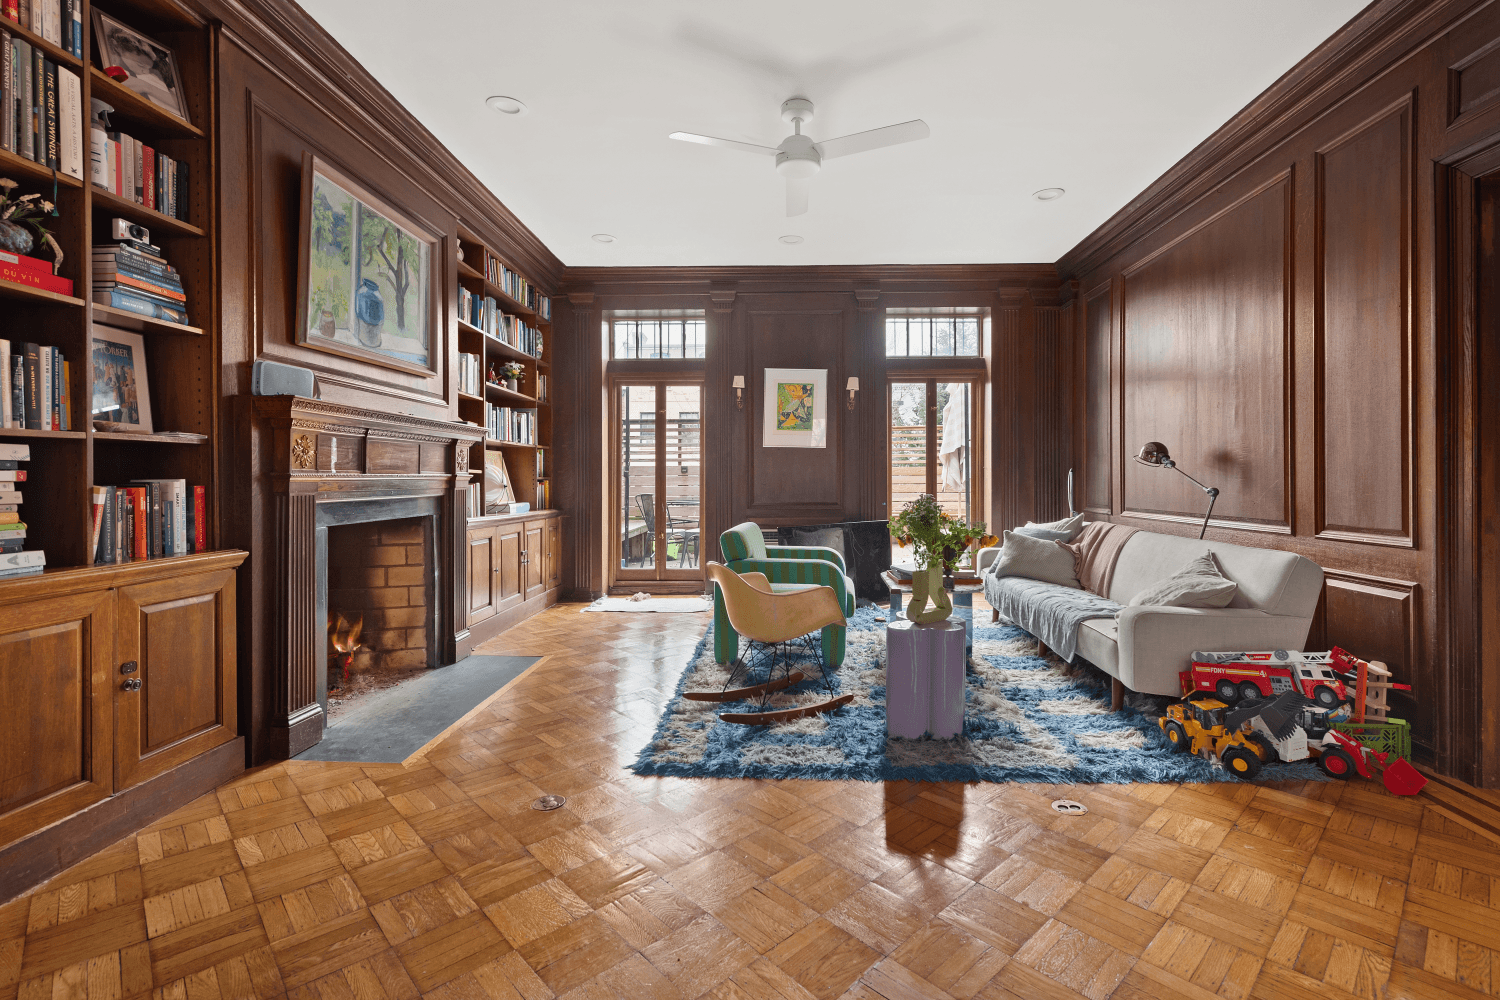 22 Schermerhorn Street is a grand and stately 25' wide, two family townhouse on a tree lined block in Brooklyn Heights.